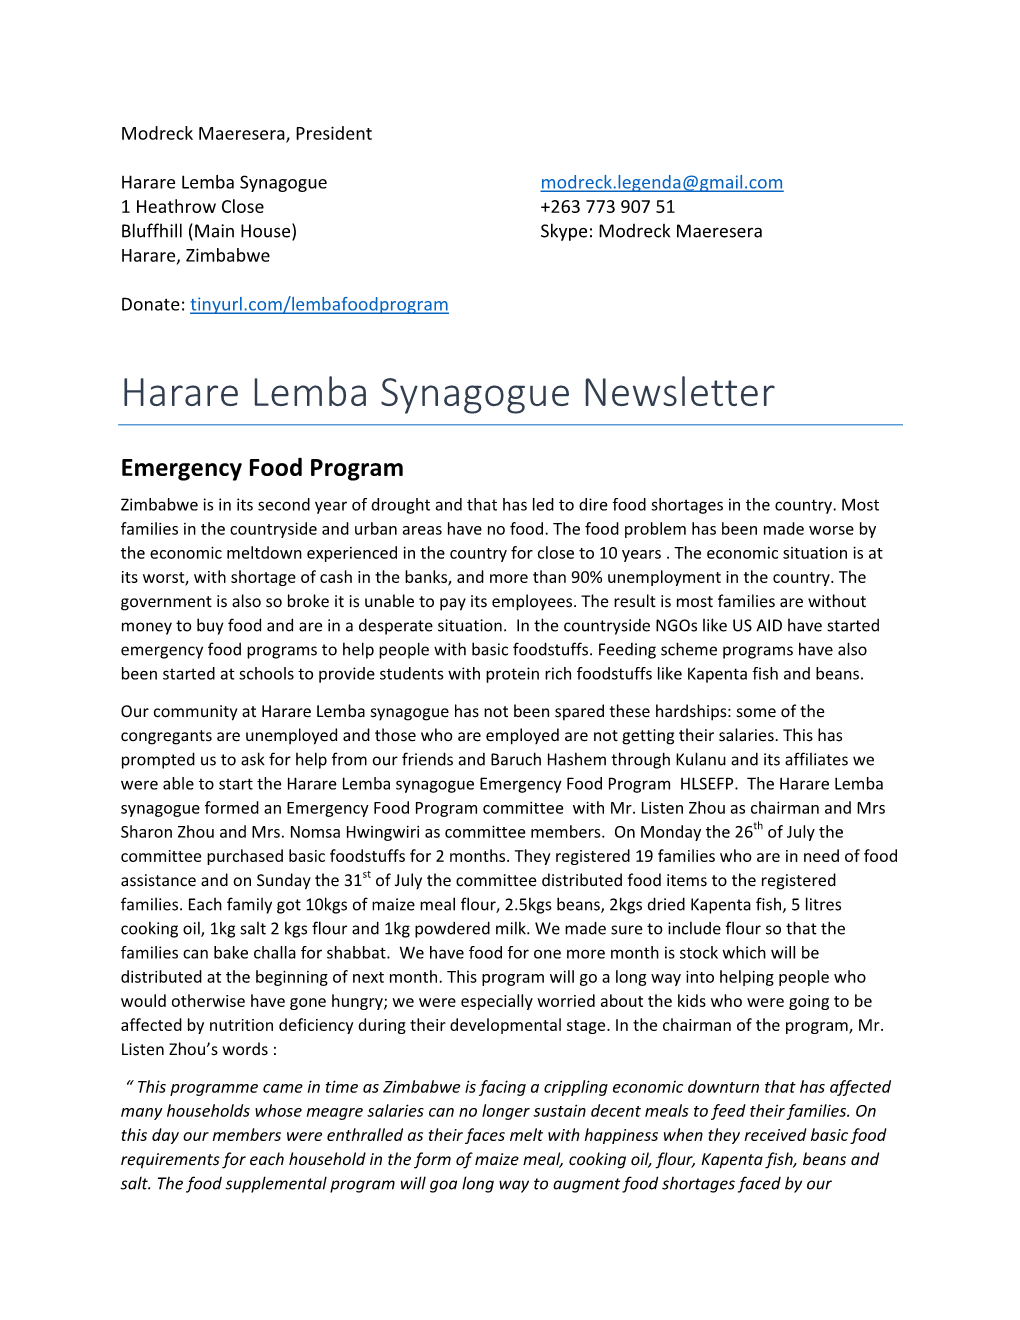 Harare Lemba Synagogue Newsletter